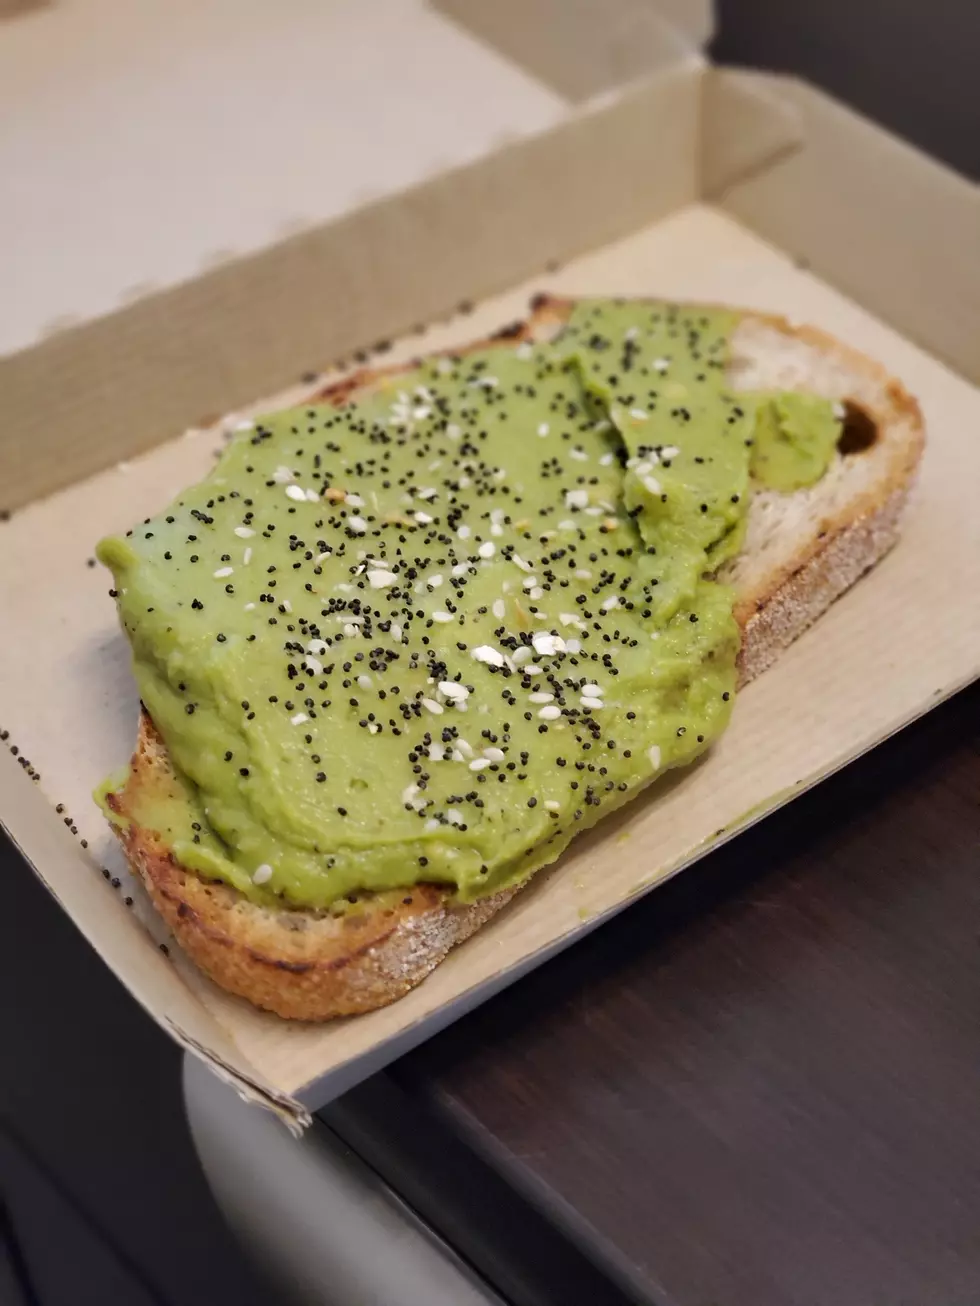 I Tried Dunkin Donuts’ New Avocado Toast So You Don’t Have To